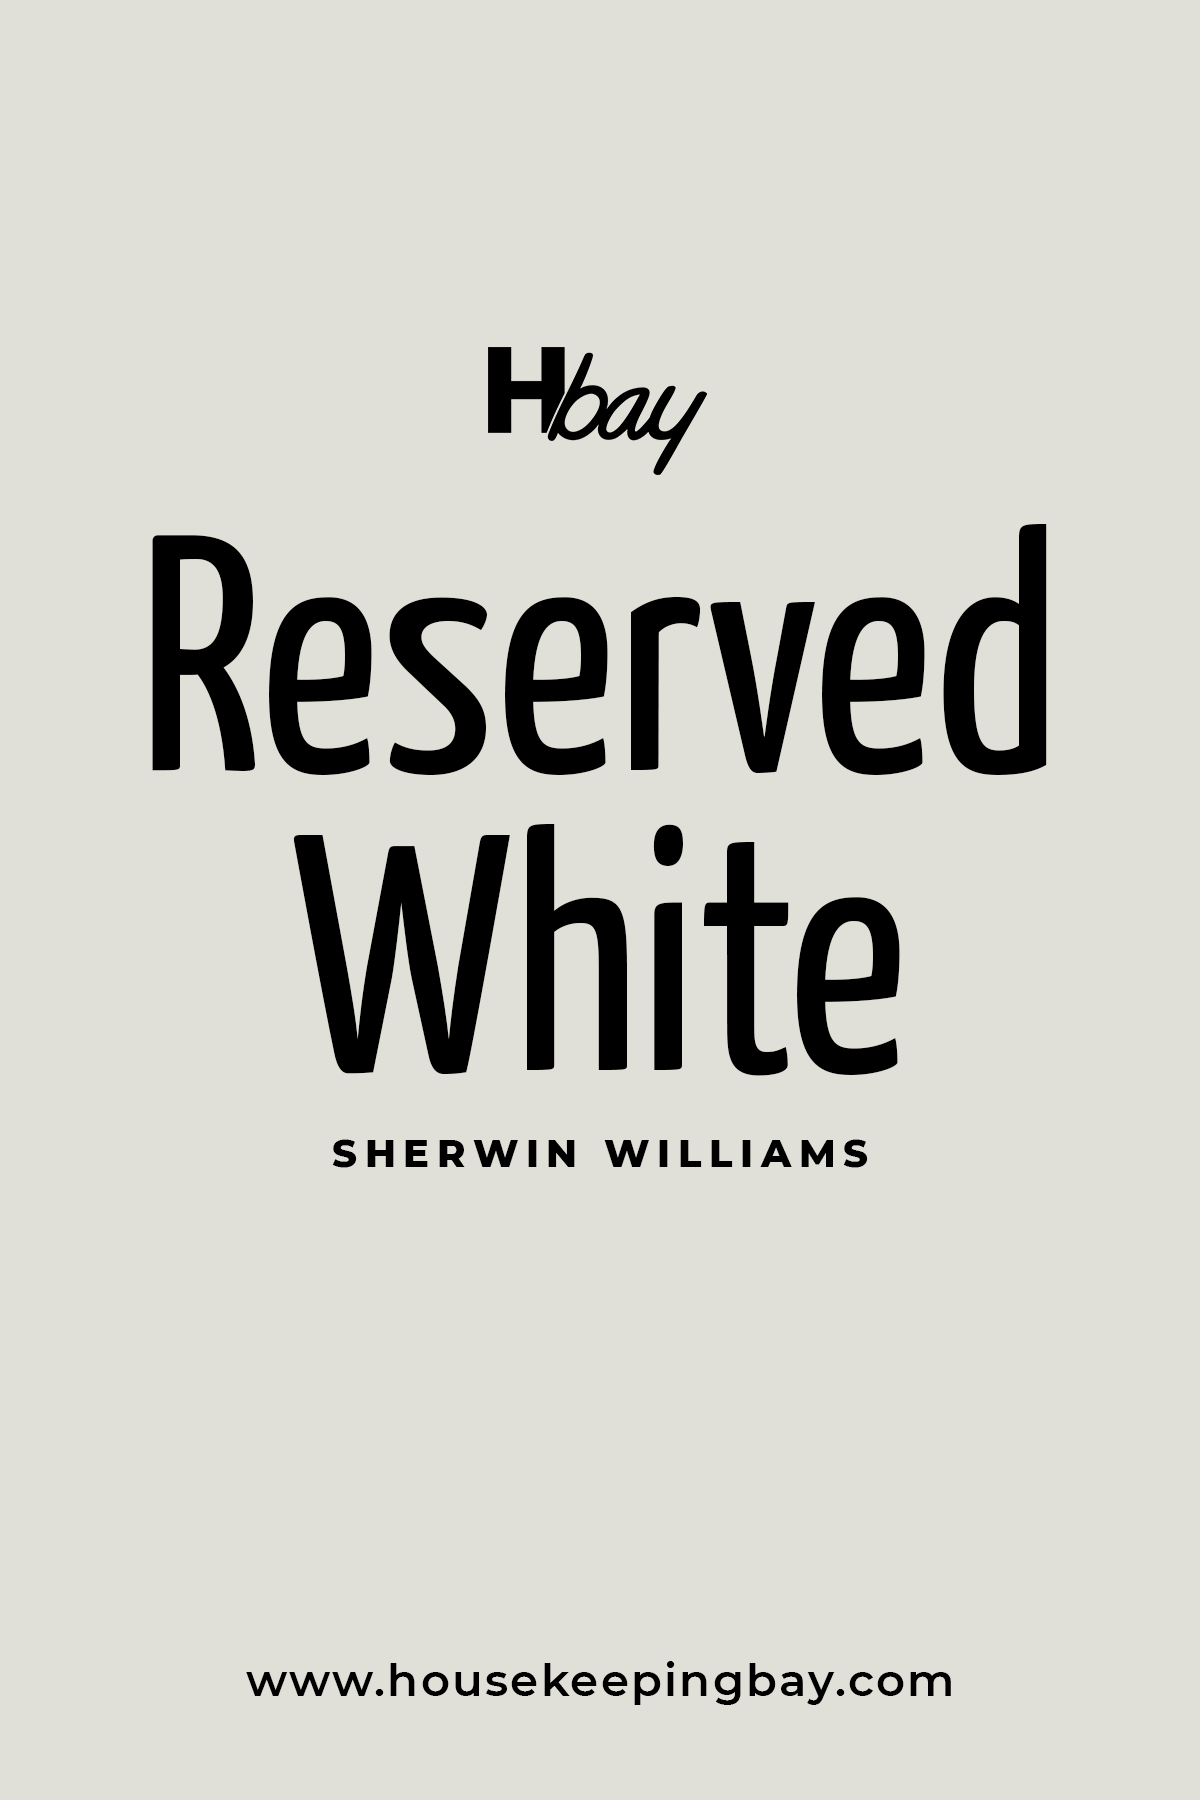 Reserved White by Sherwin Williams